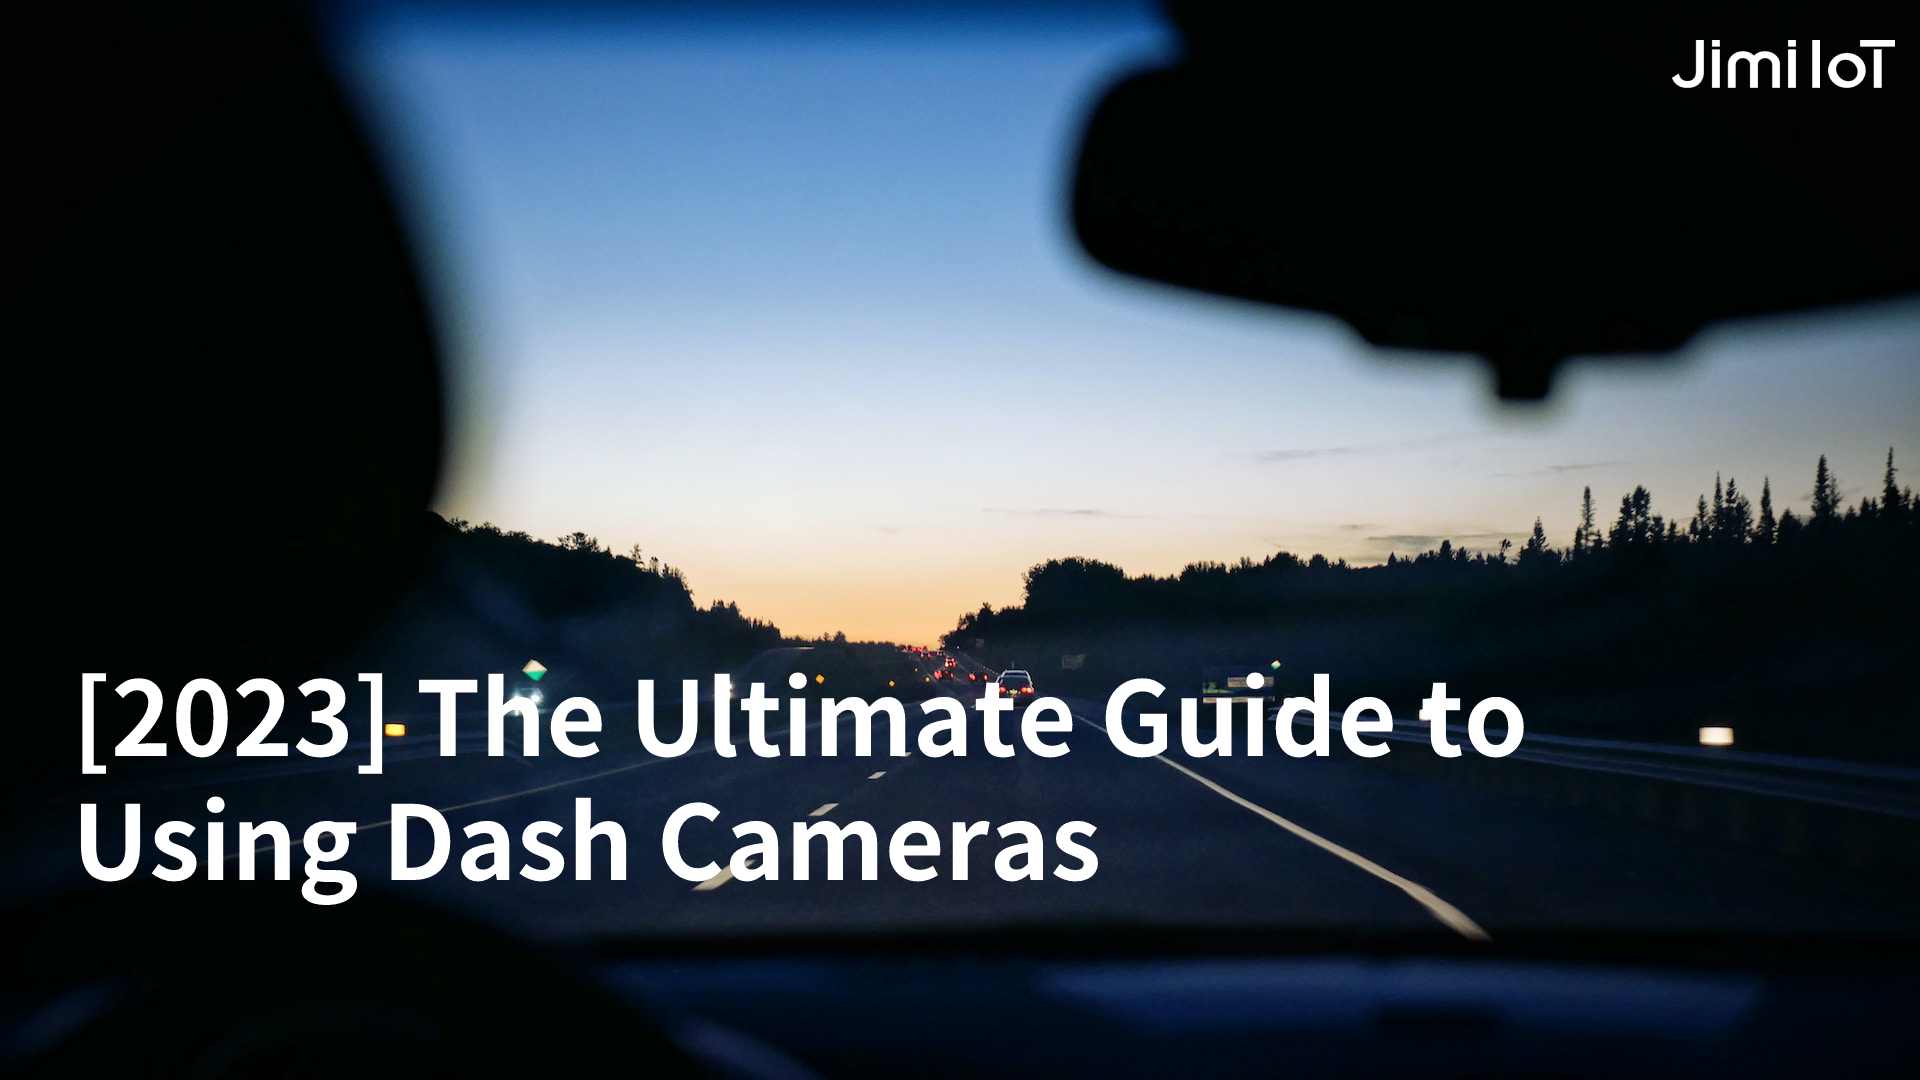 The Ultimate Guide to Using Dash Cameras.jpg